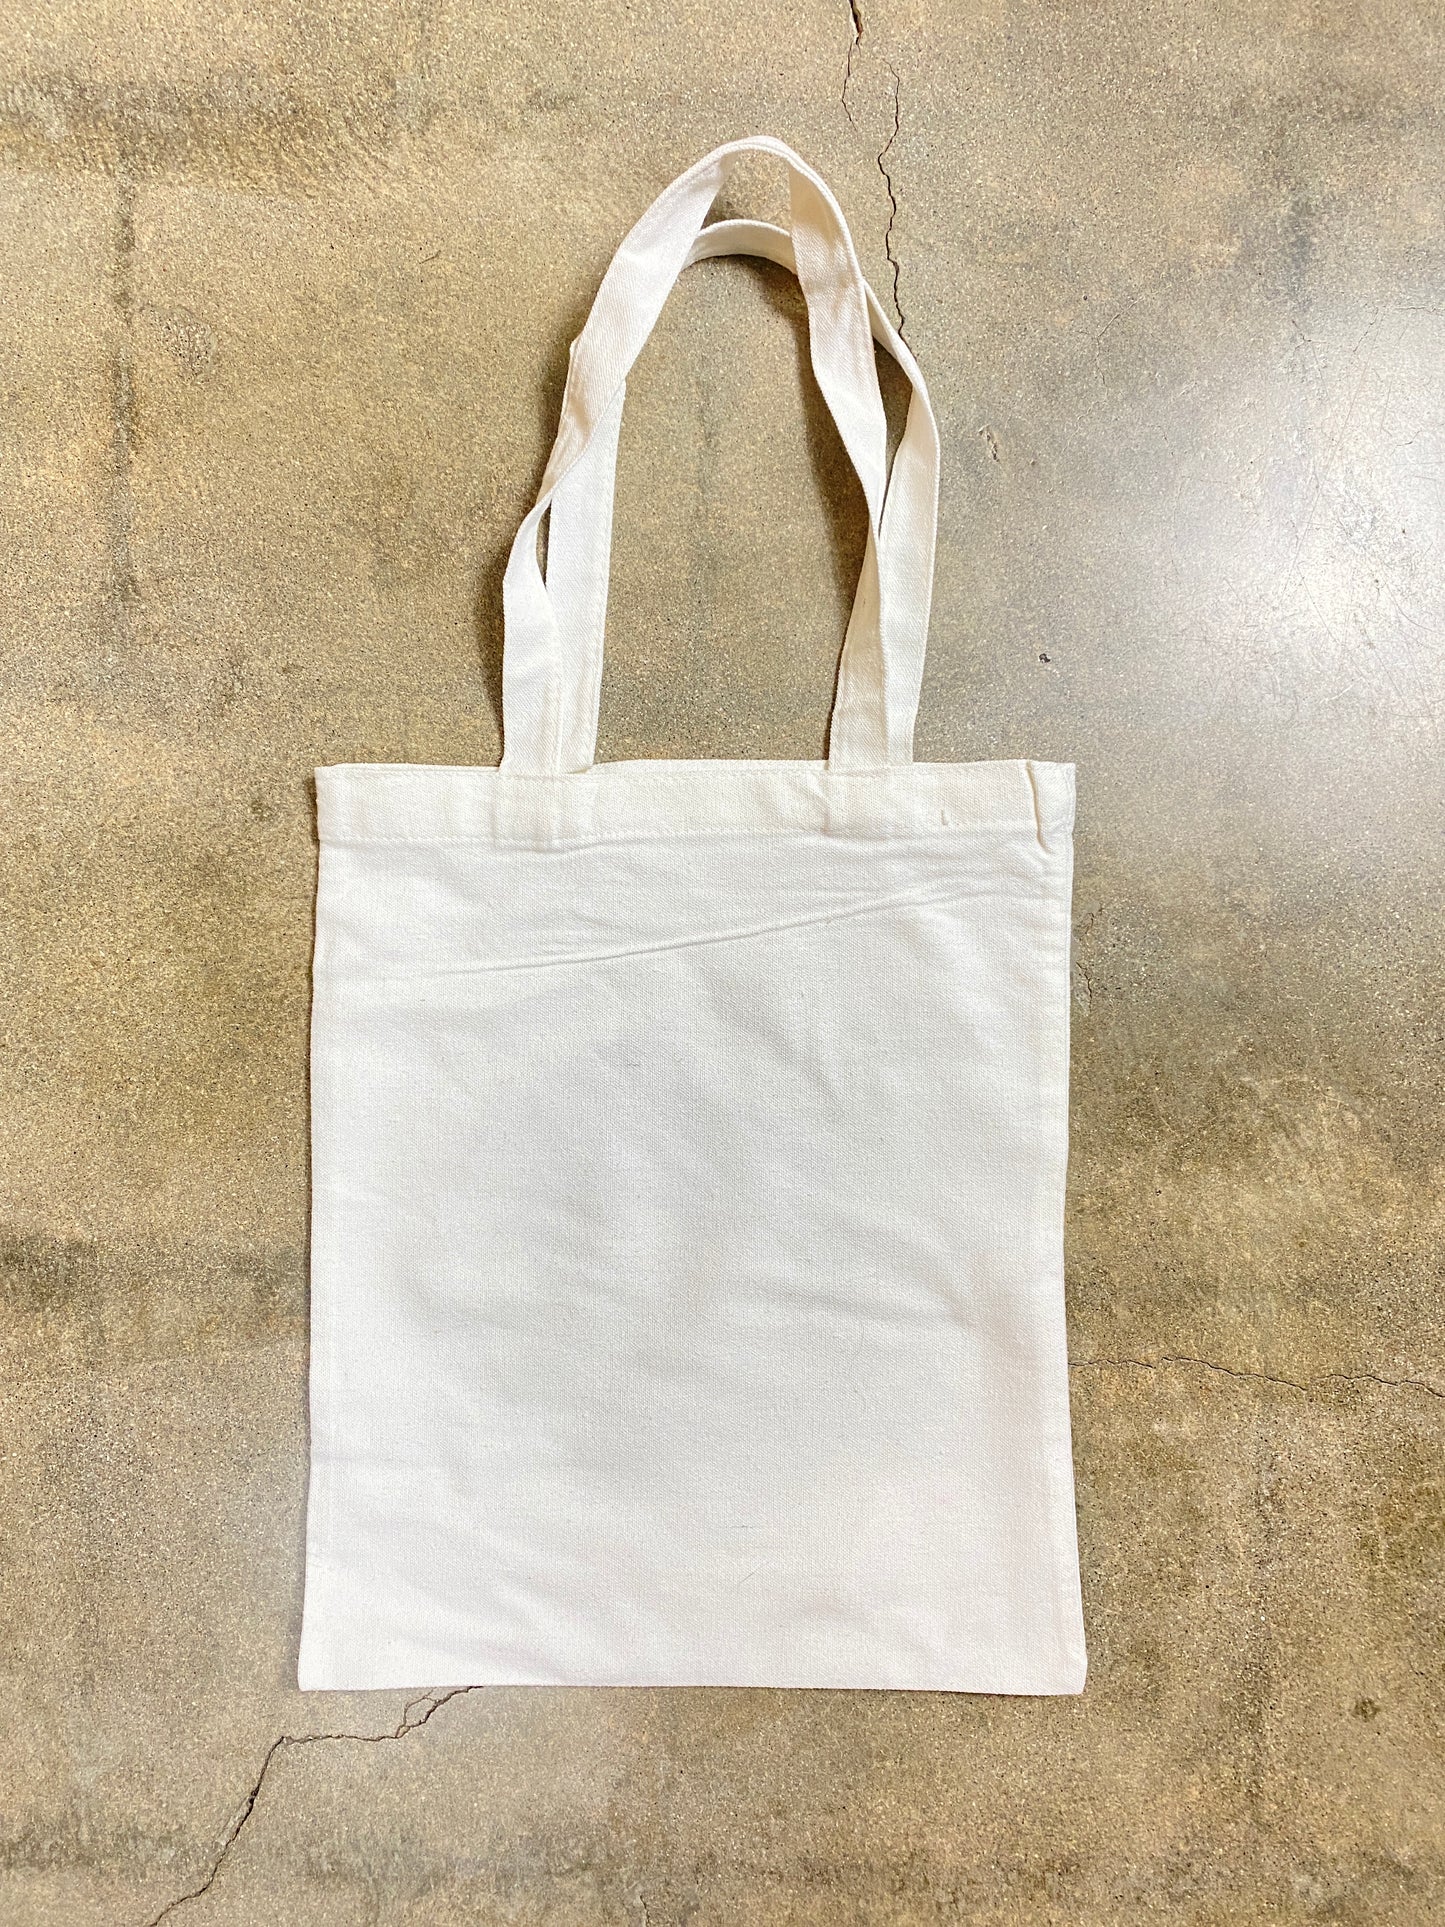 Sweetest Tote